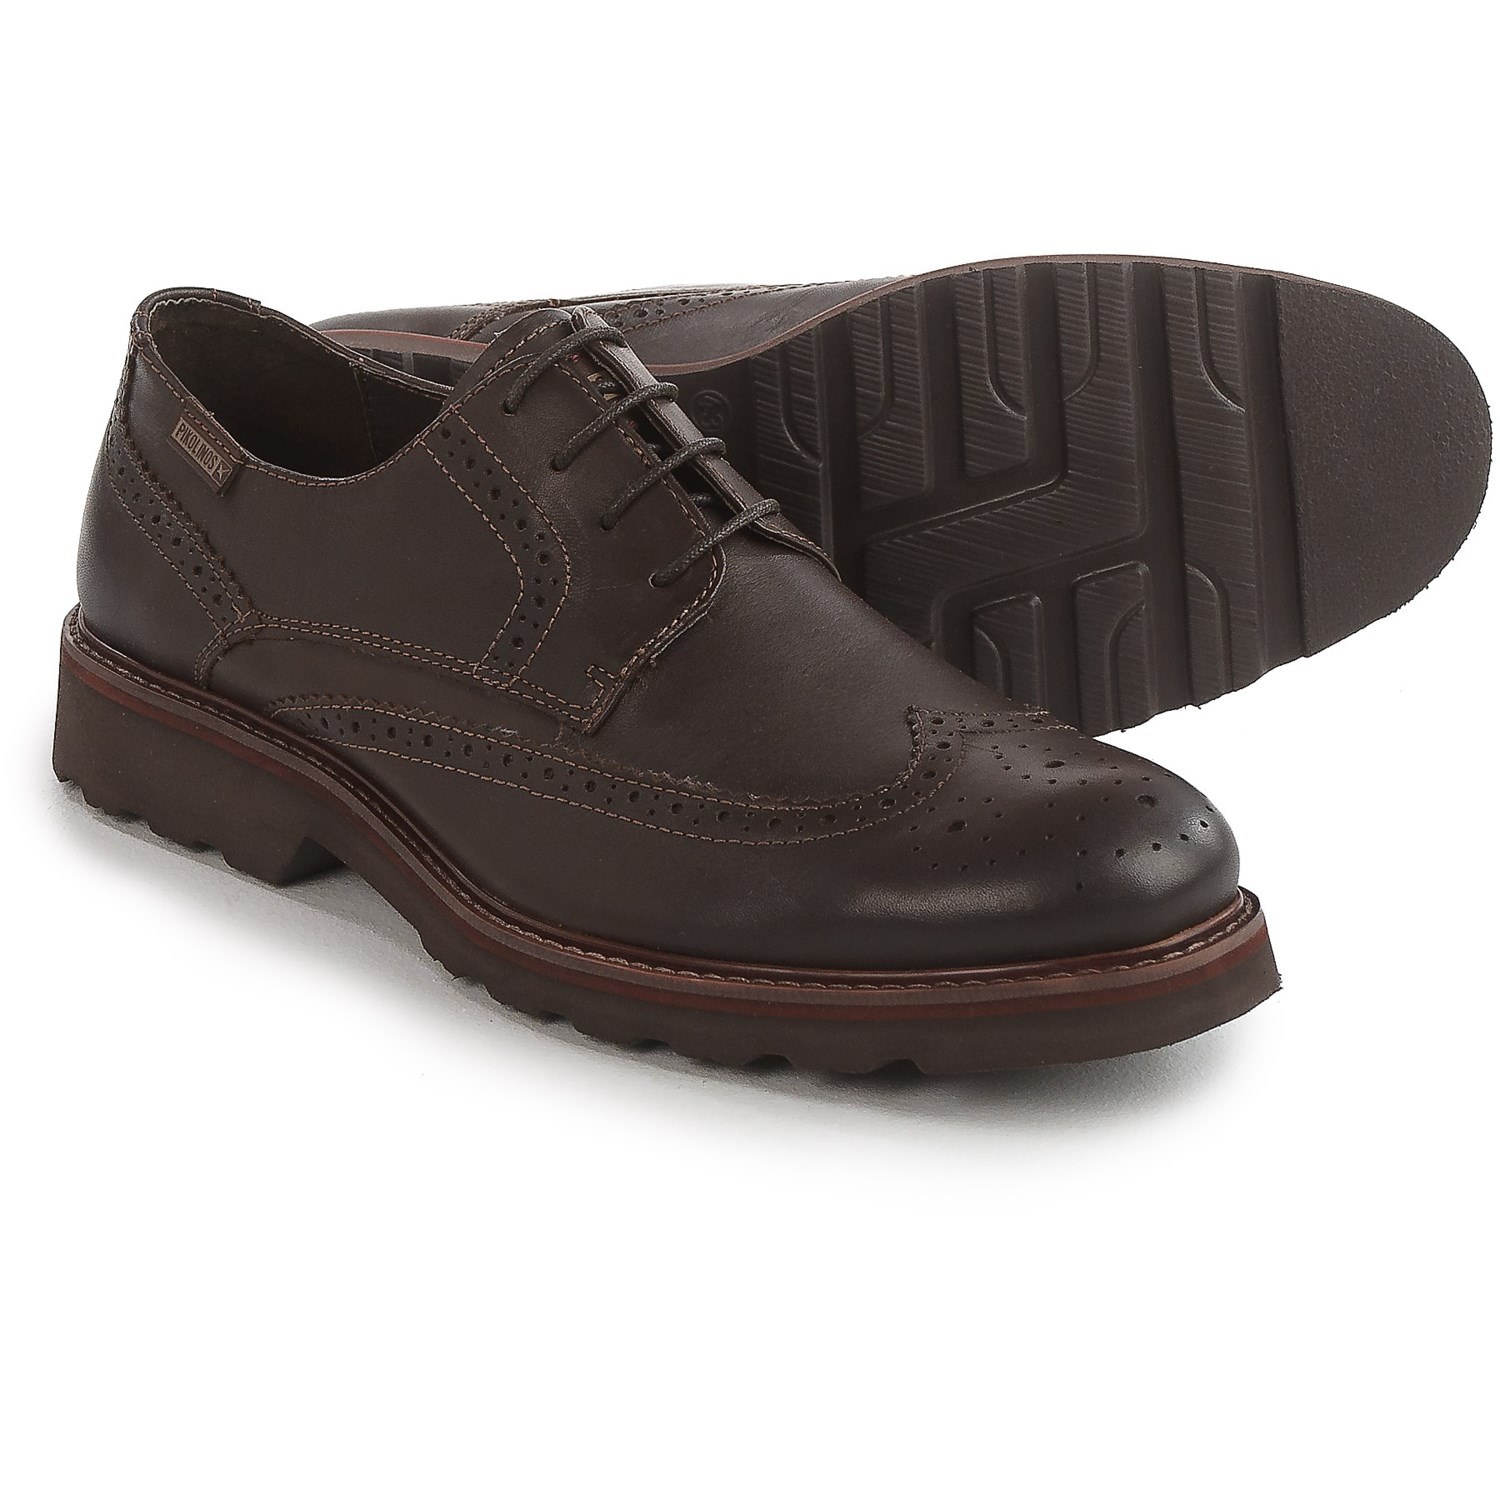 Pikolinos Glasgow Shoes – Leather (For Men)